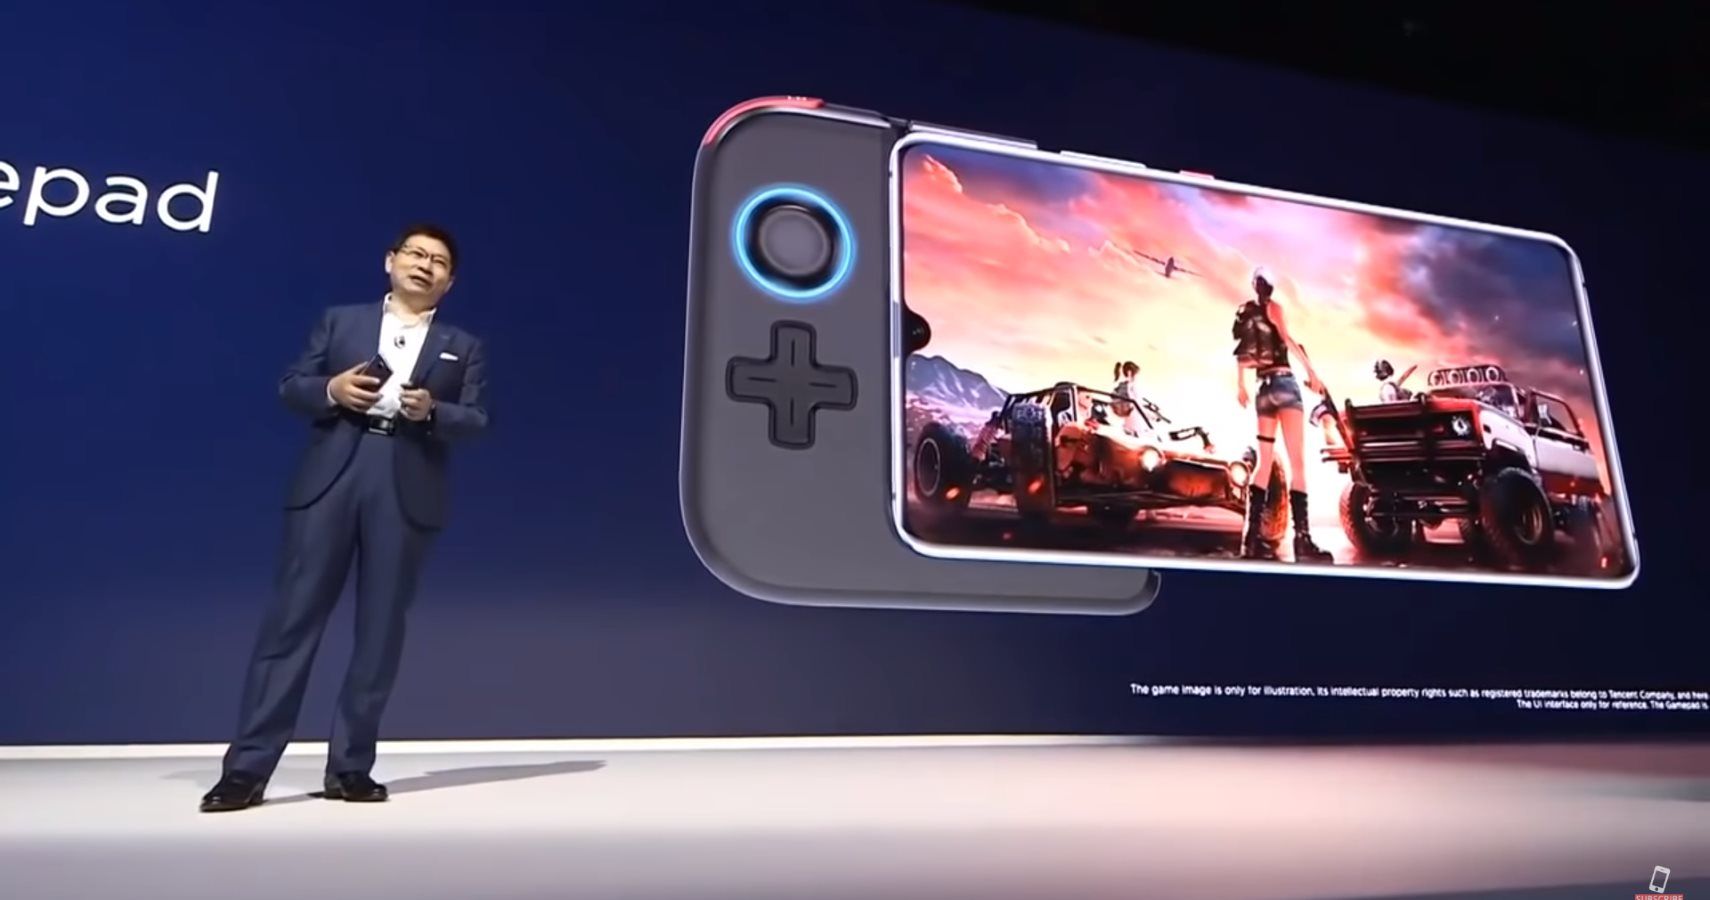 Huaweis New 72Inch Gaming Phone The Mate 20 X Enters The Portable Gaming Market